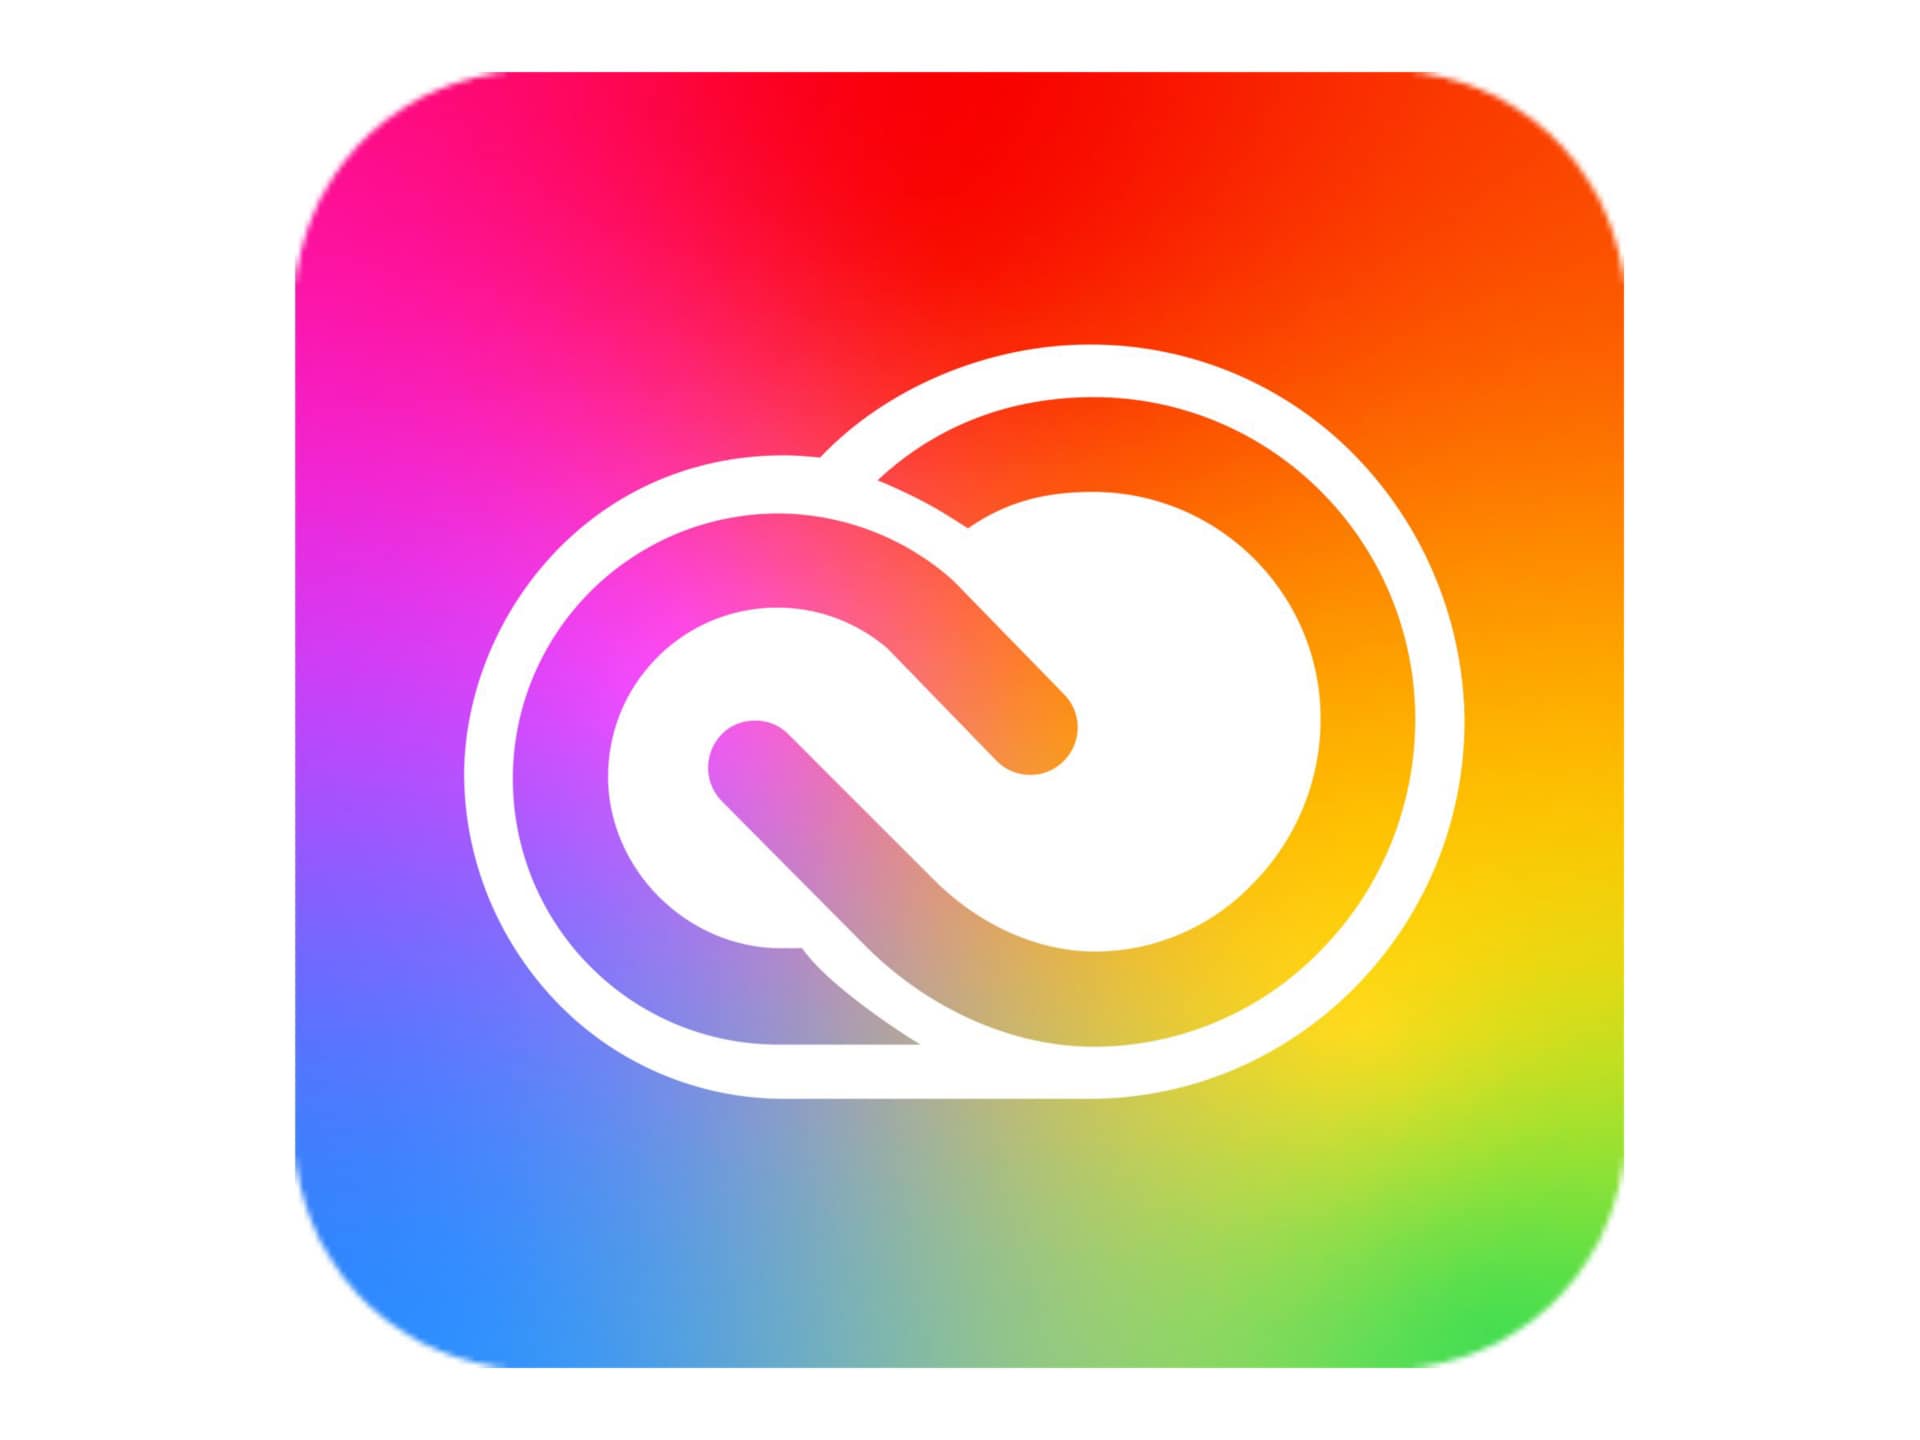 Adobe Creative Cloud for teams - Subscription New (3 years) - 10 assets, 1 named user - with Adobe Stock